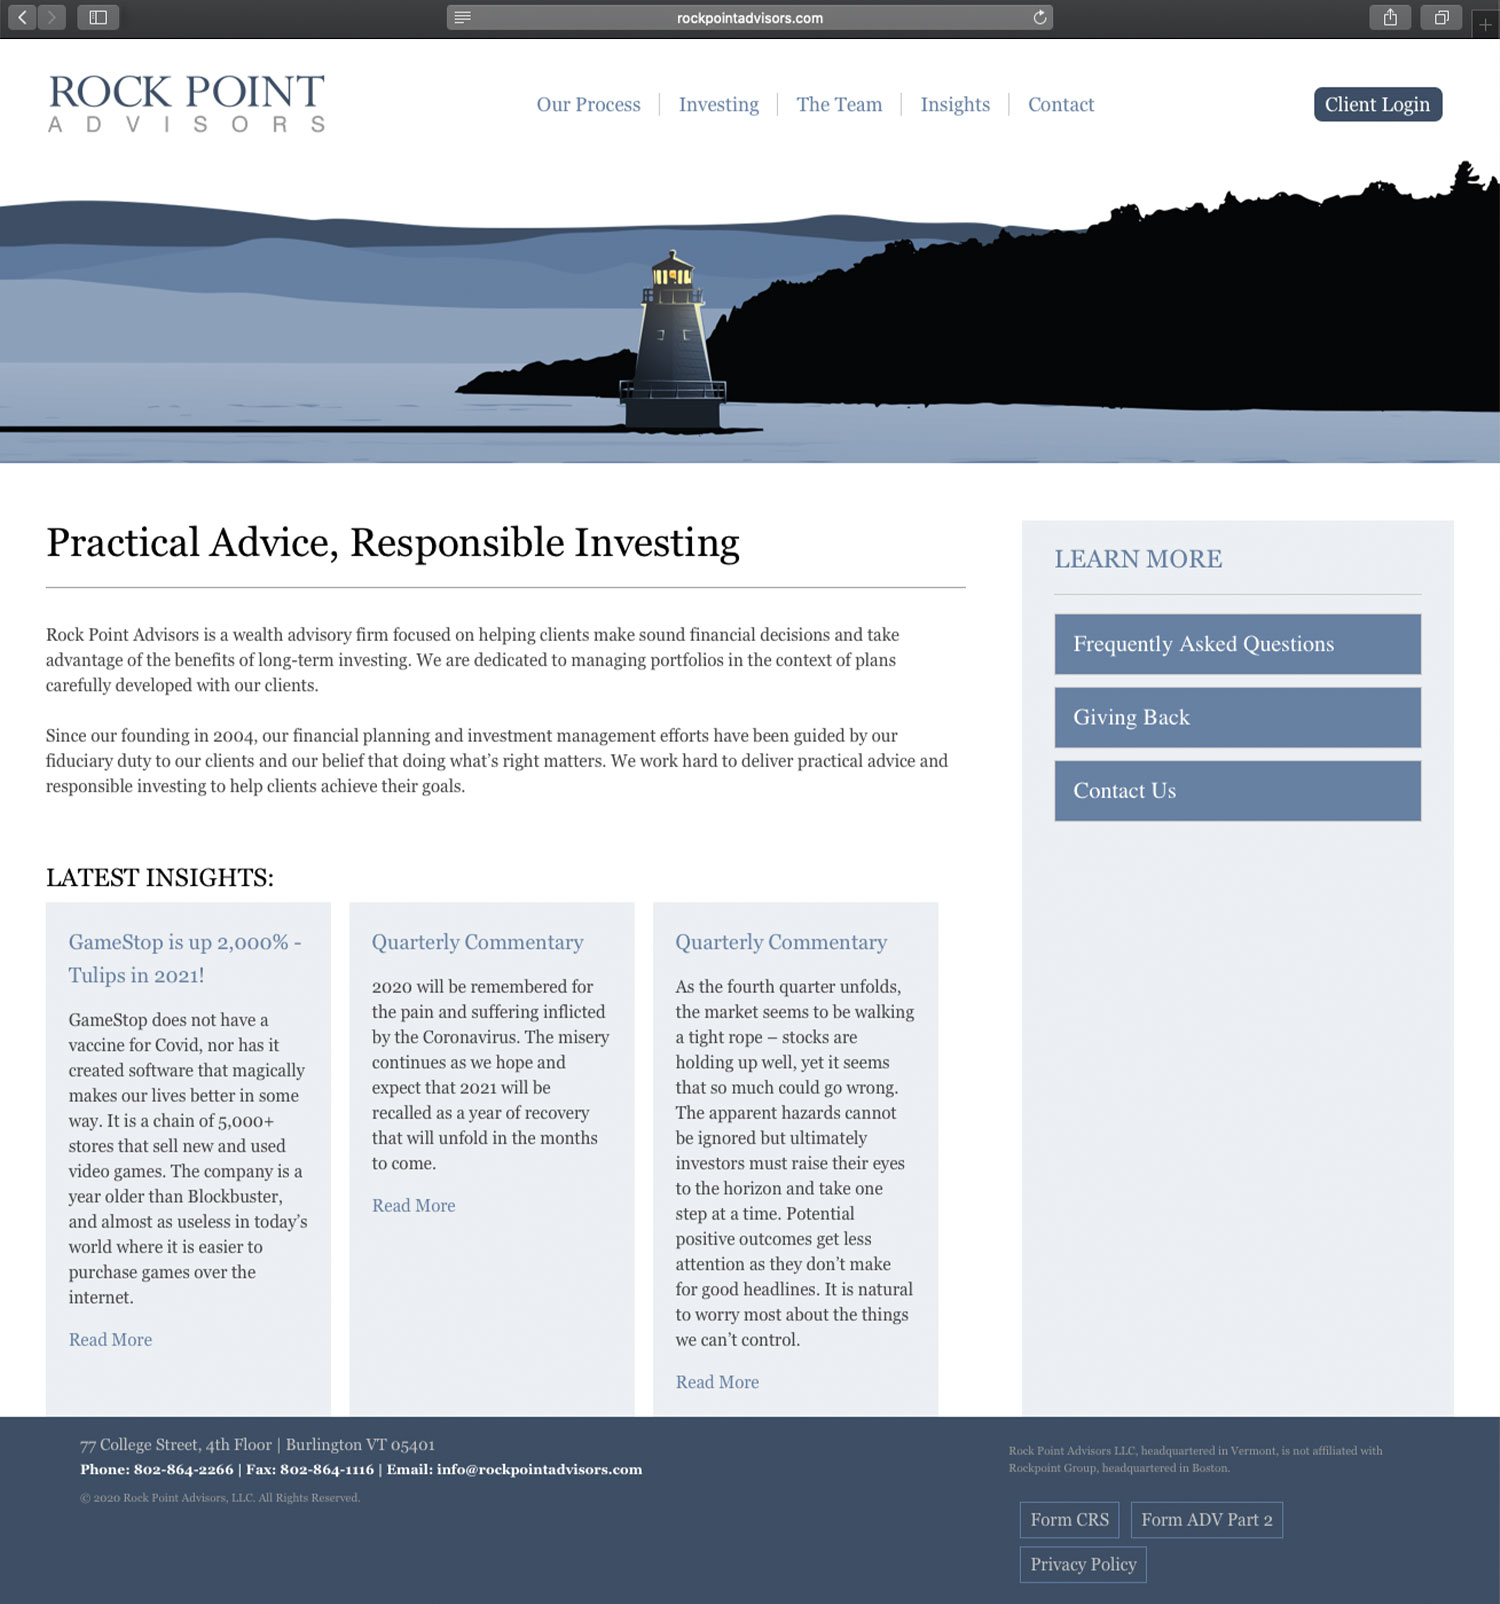 Website design and website development for Rock Point Advisors - homepage view.